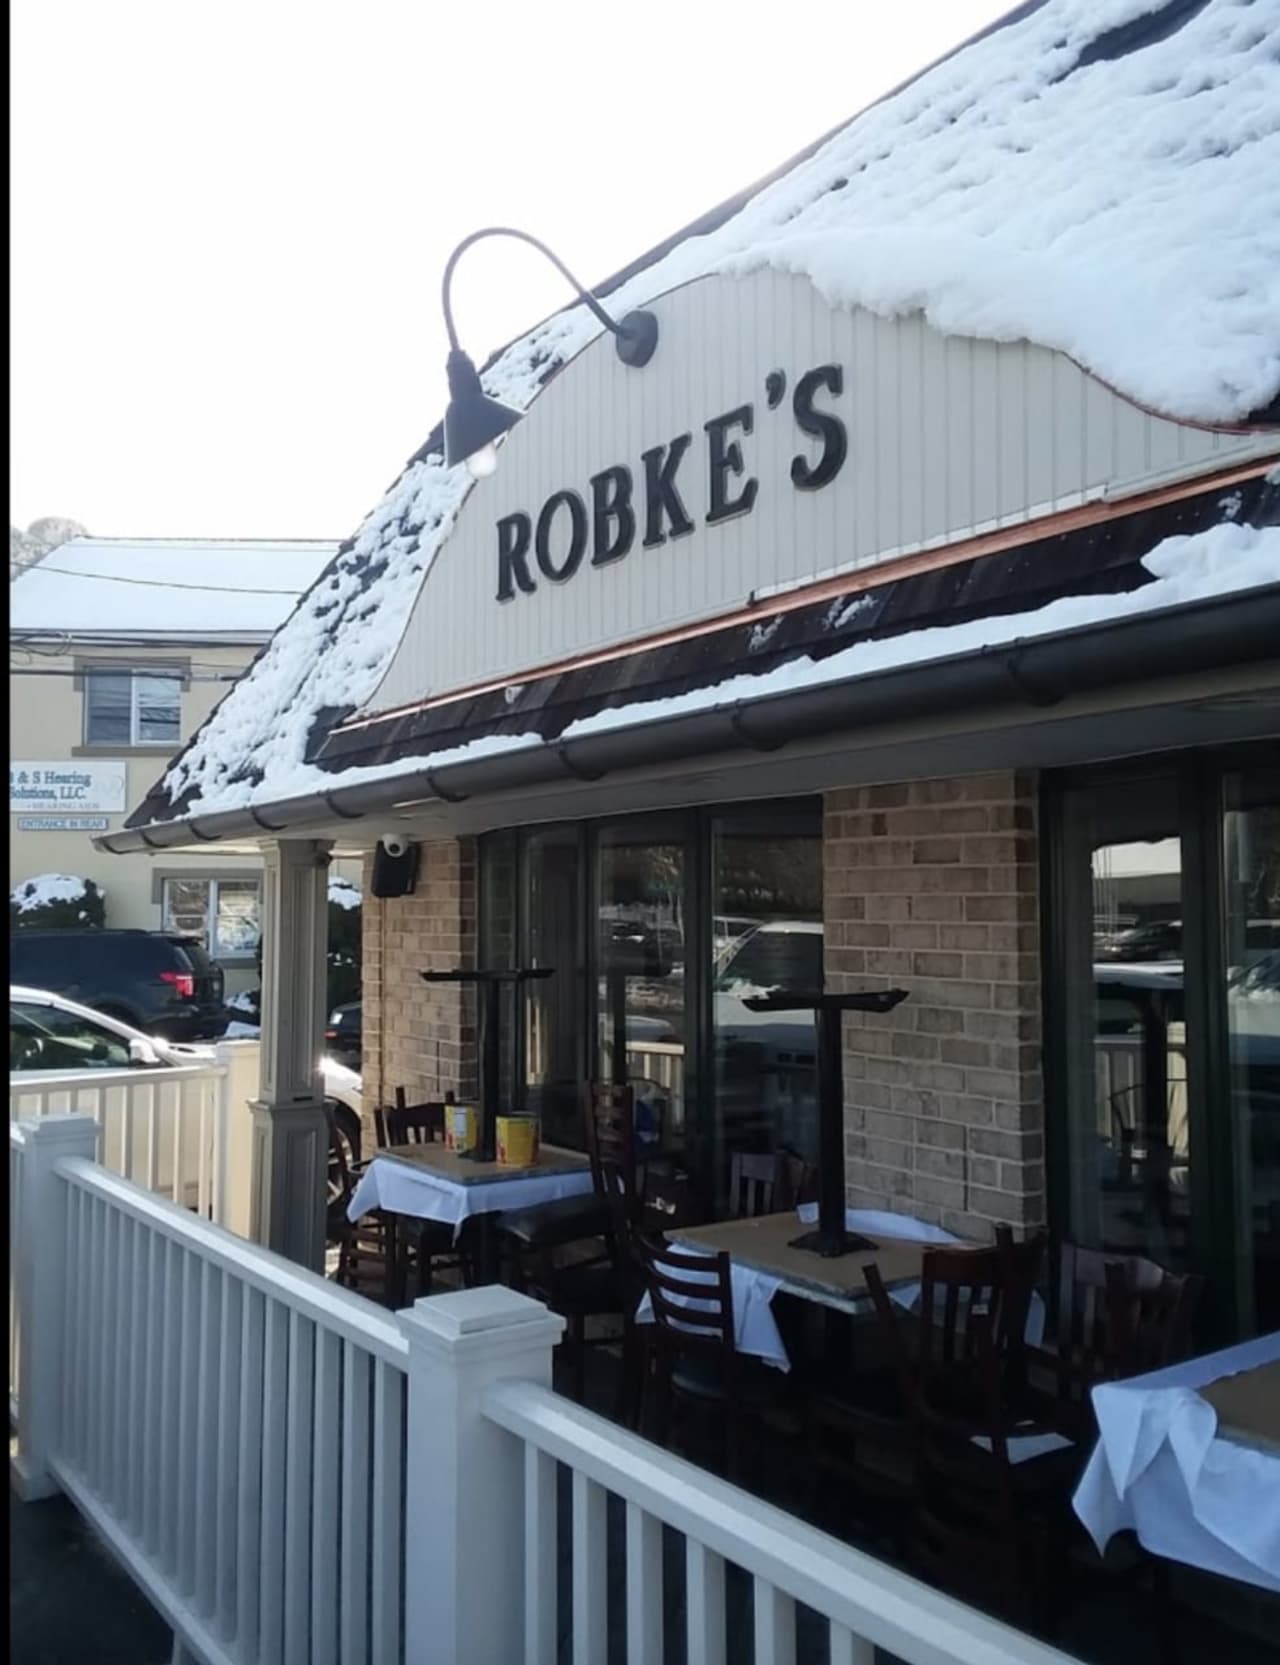 Robke's of Northport has lost its liquor license for violating COVID-19 rules and regulations.